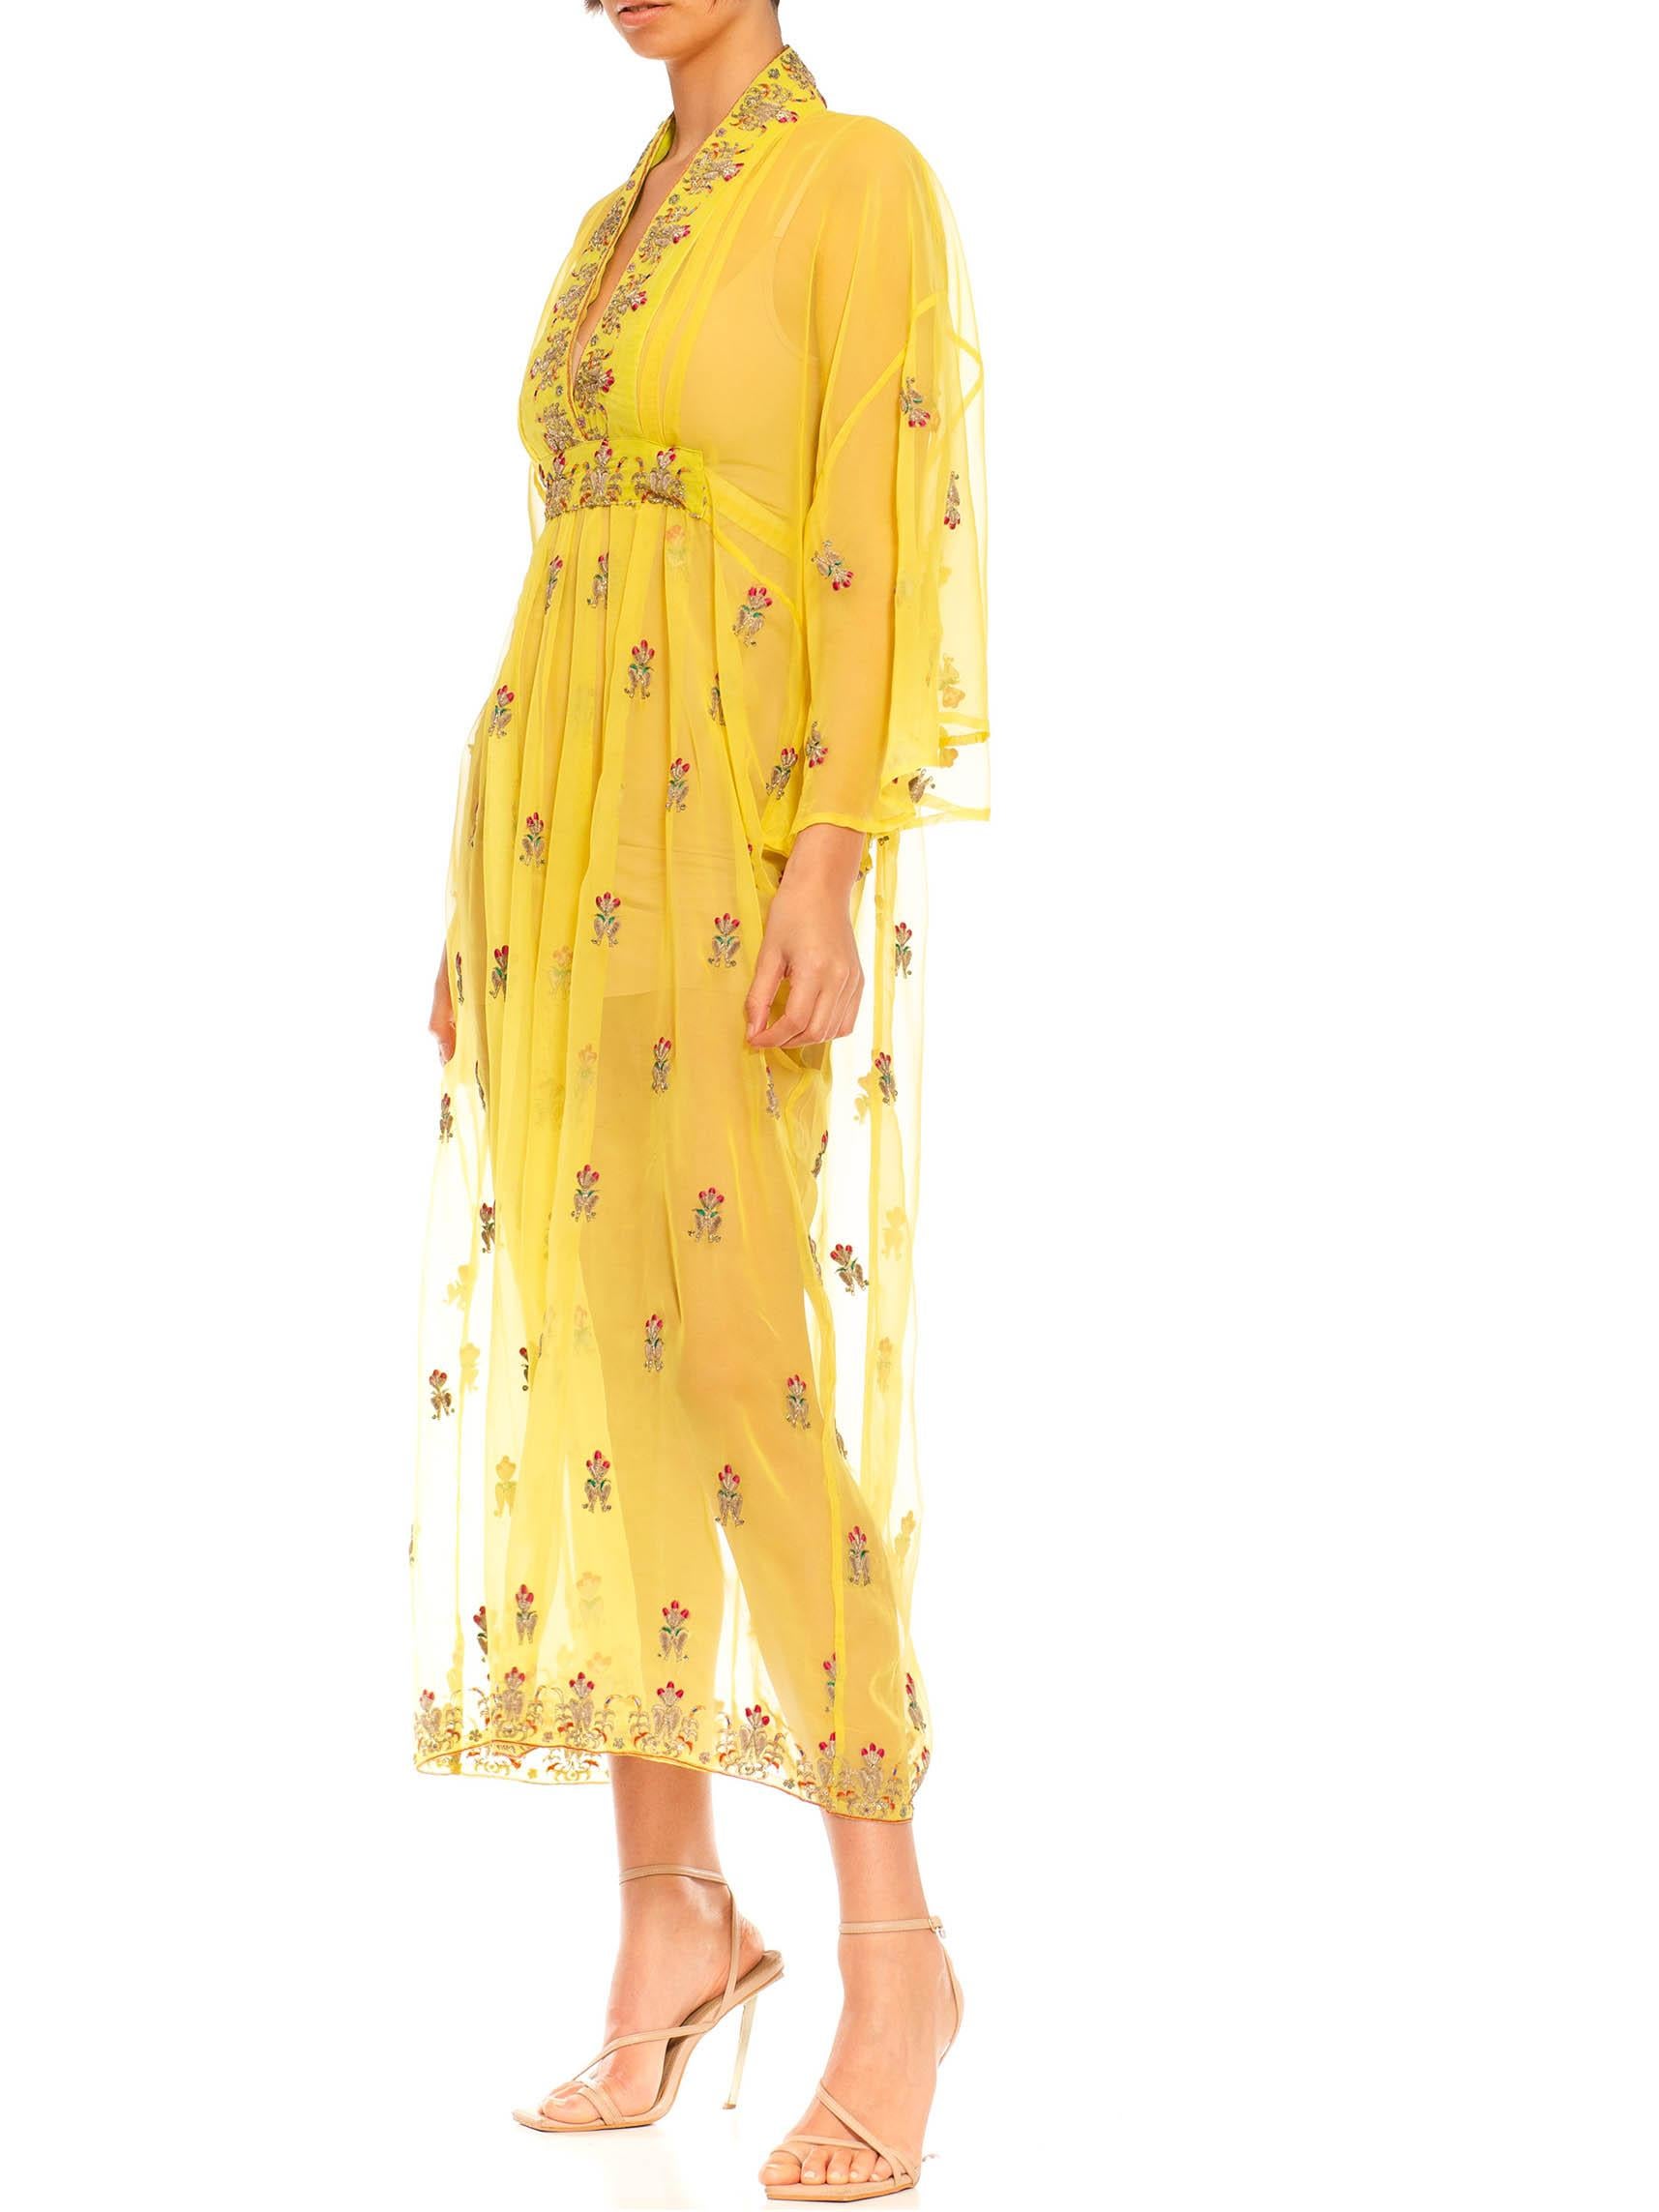 Morphew Collection Yellows & Gold Embroidered Beaded Silk Kaftan Made From Vintage Saris
MORPHEW COLLECTION is made entirely by hand in our NYC Ateliér of rare antique materials sourced from around the globe. Our sustainable vintage materials